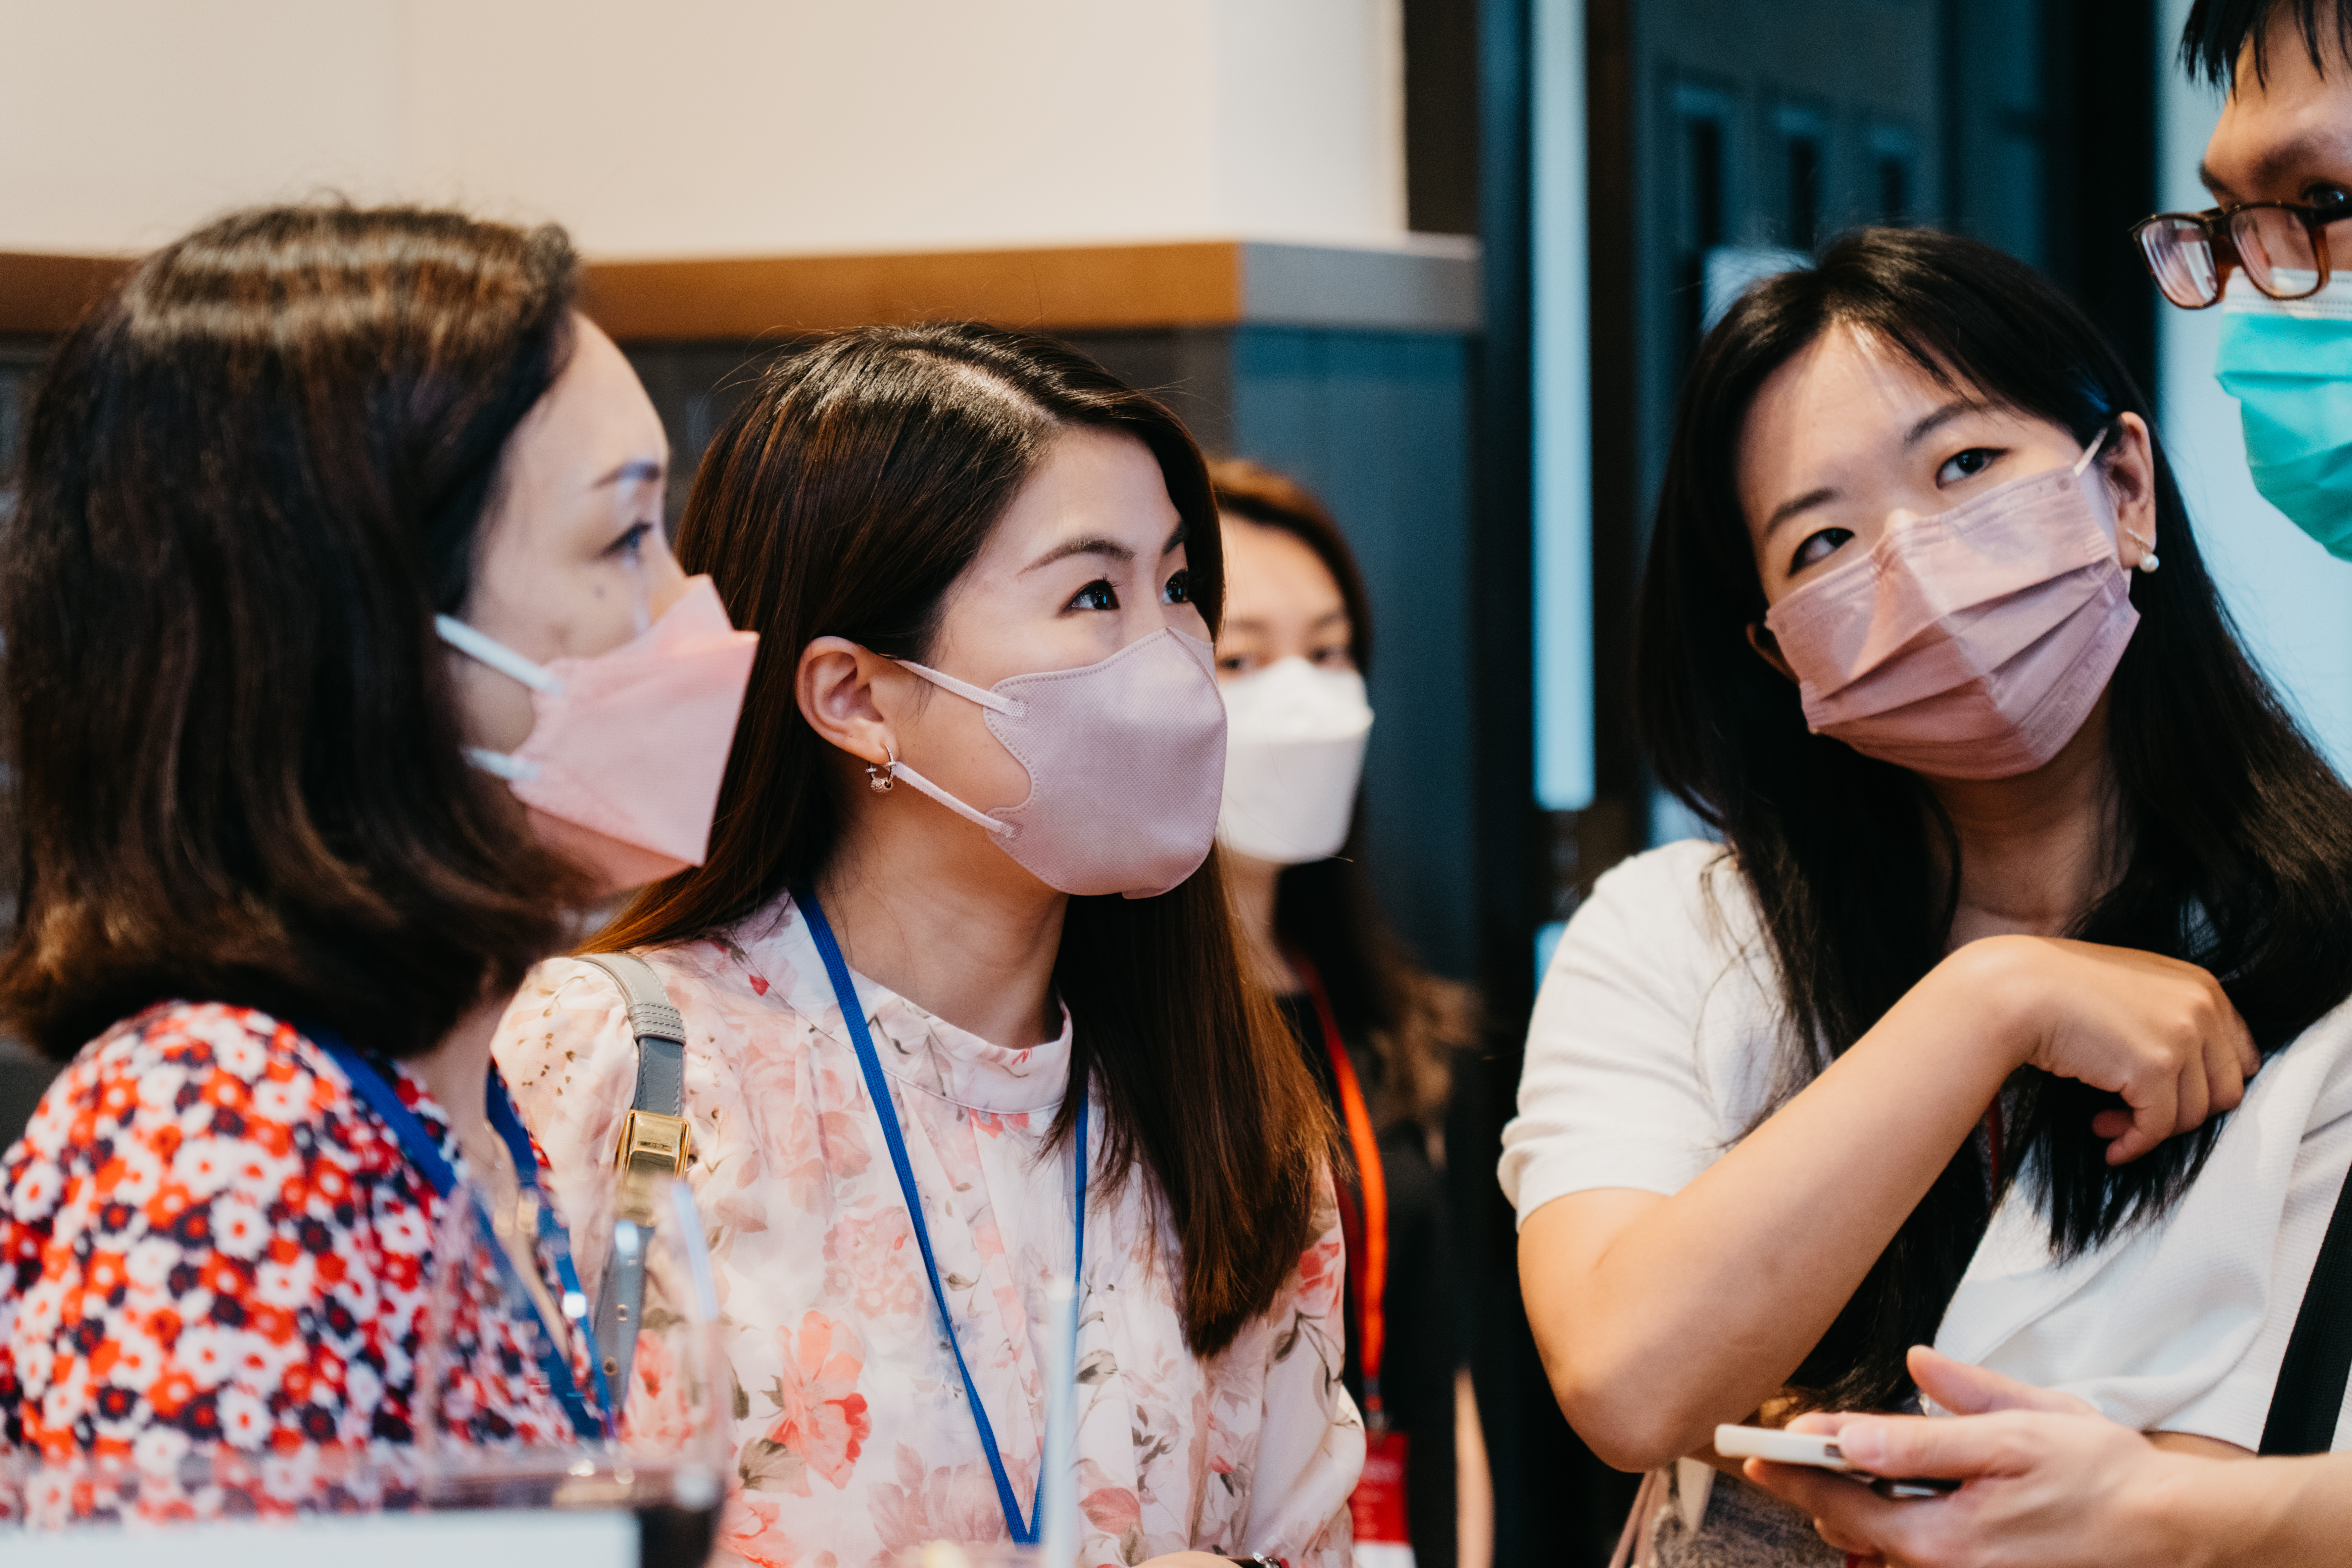 The Cancellations of Mask Rules in Hong Kong Boost the Event Industry